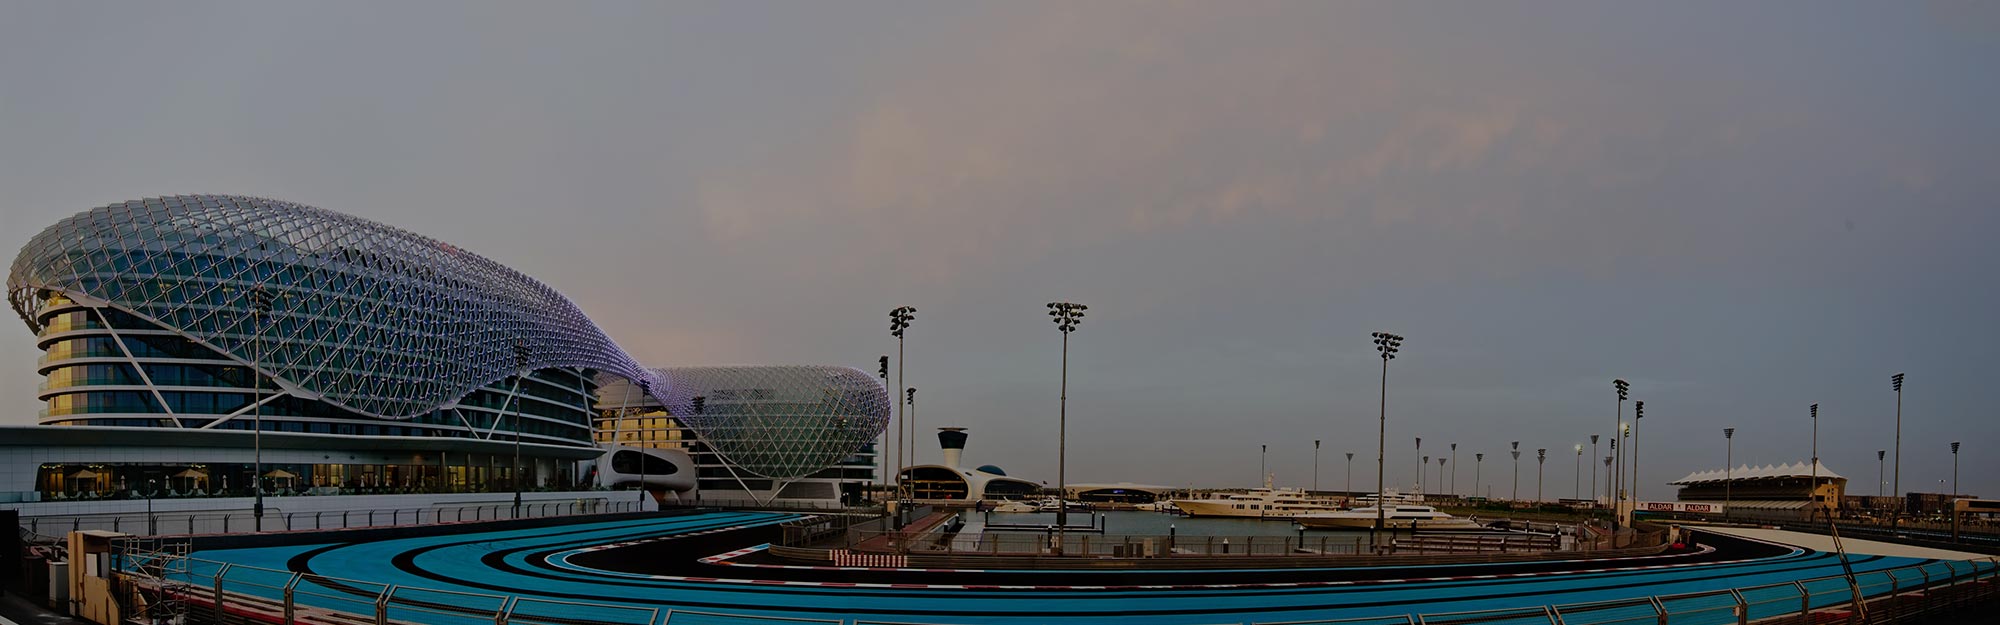 view of the abu dhabi racetrack and the yas viceroy hotel